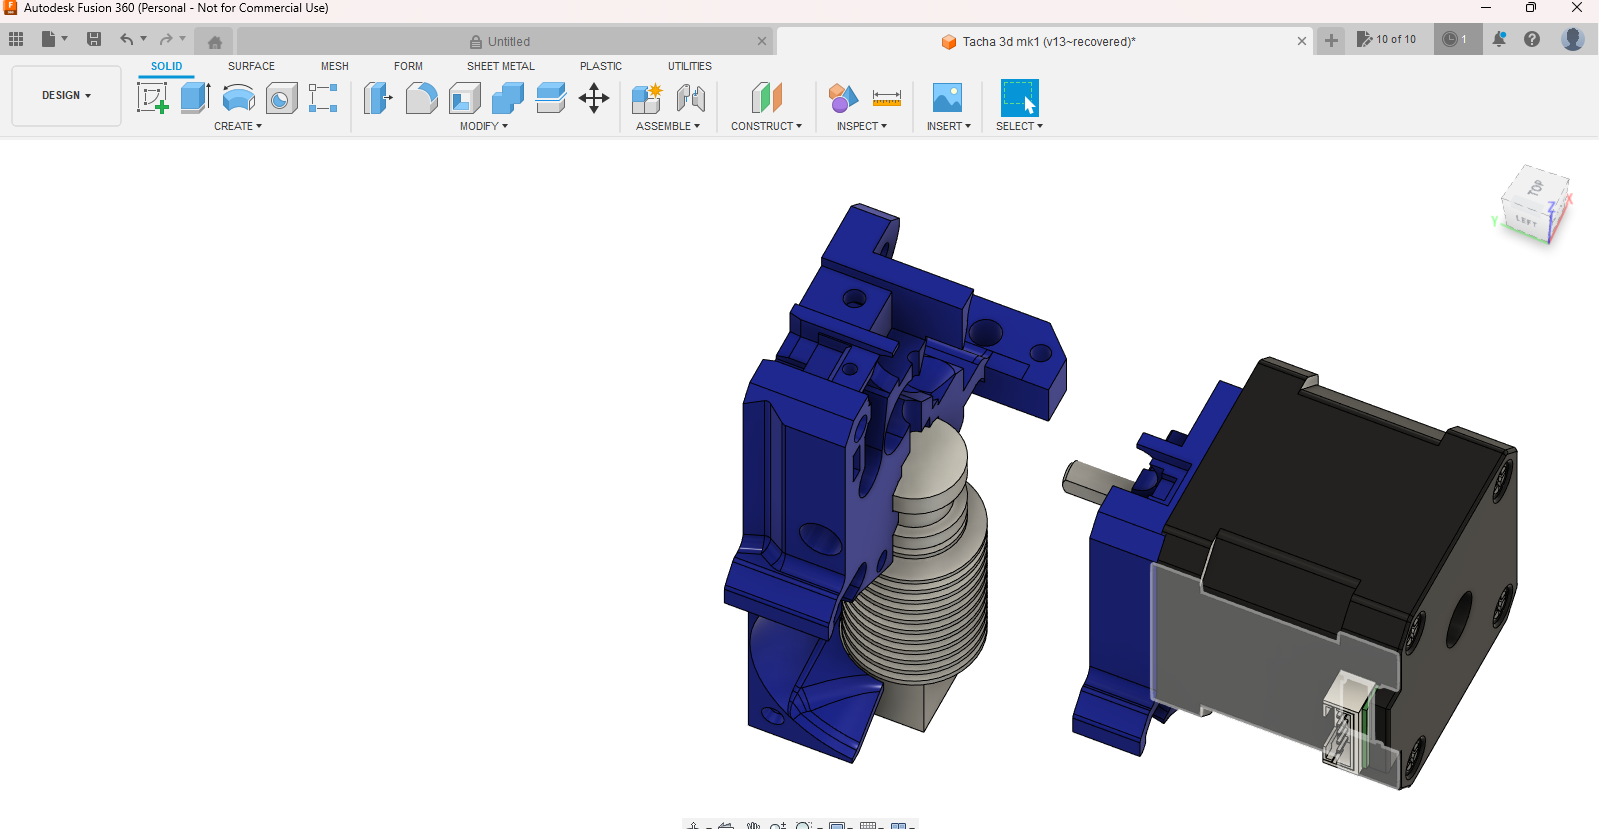 Autodesk Fusion 360 (Personal - Not for Commercial Use) 6_29_2023 10_03_24 PM.png